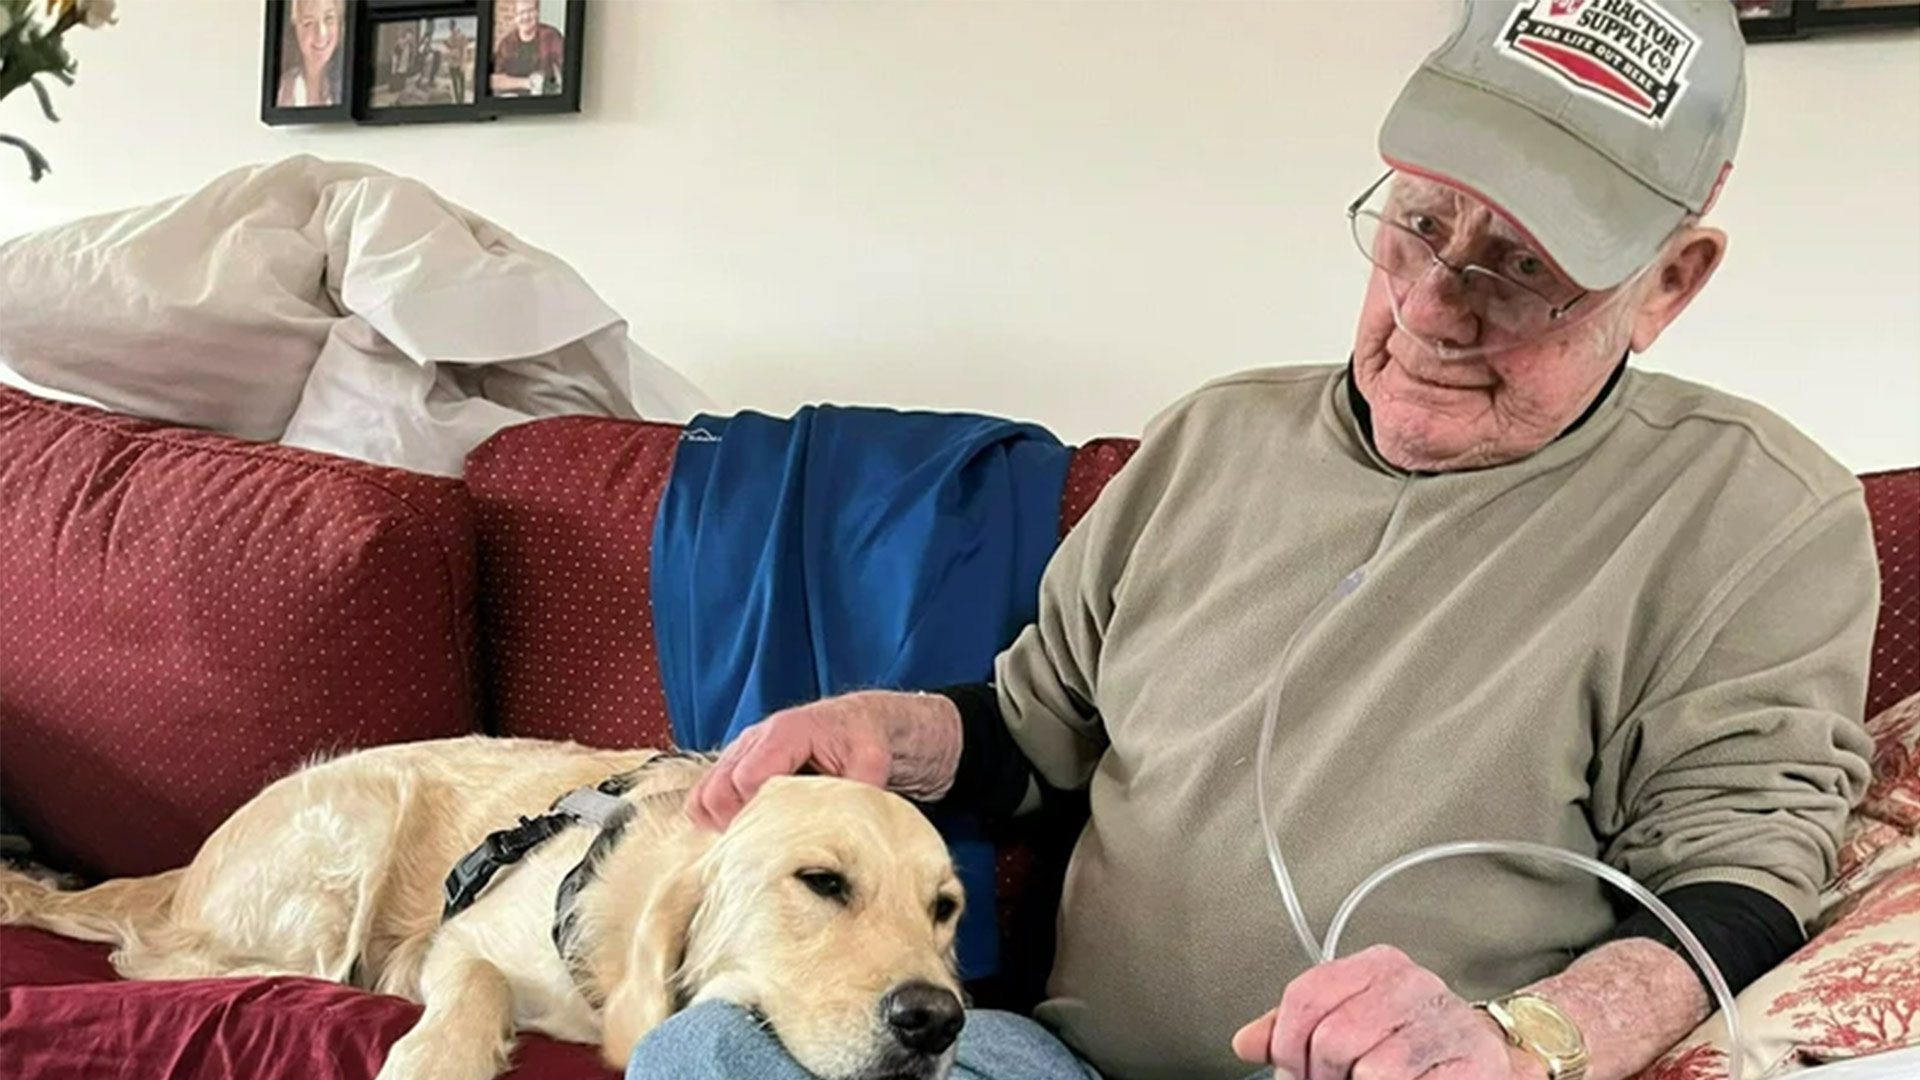 Howard Houlden got hospital-at-home care for covid, COPD and congestive heart failure. Though he has since died, his daughter, Lori Girard, says it likely extended his life and helped him enjoy himself.